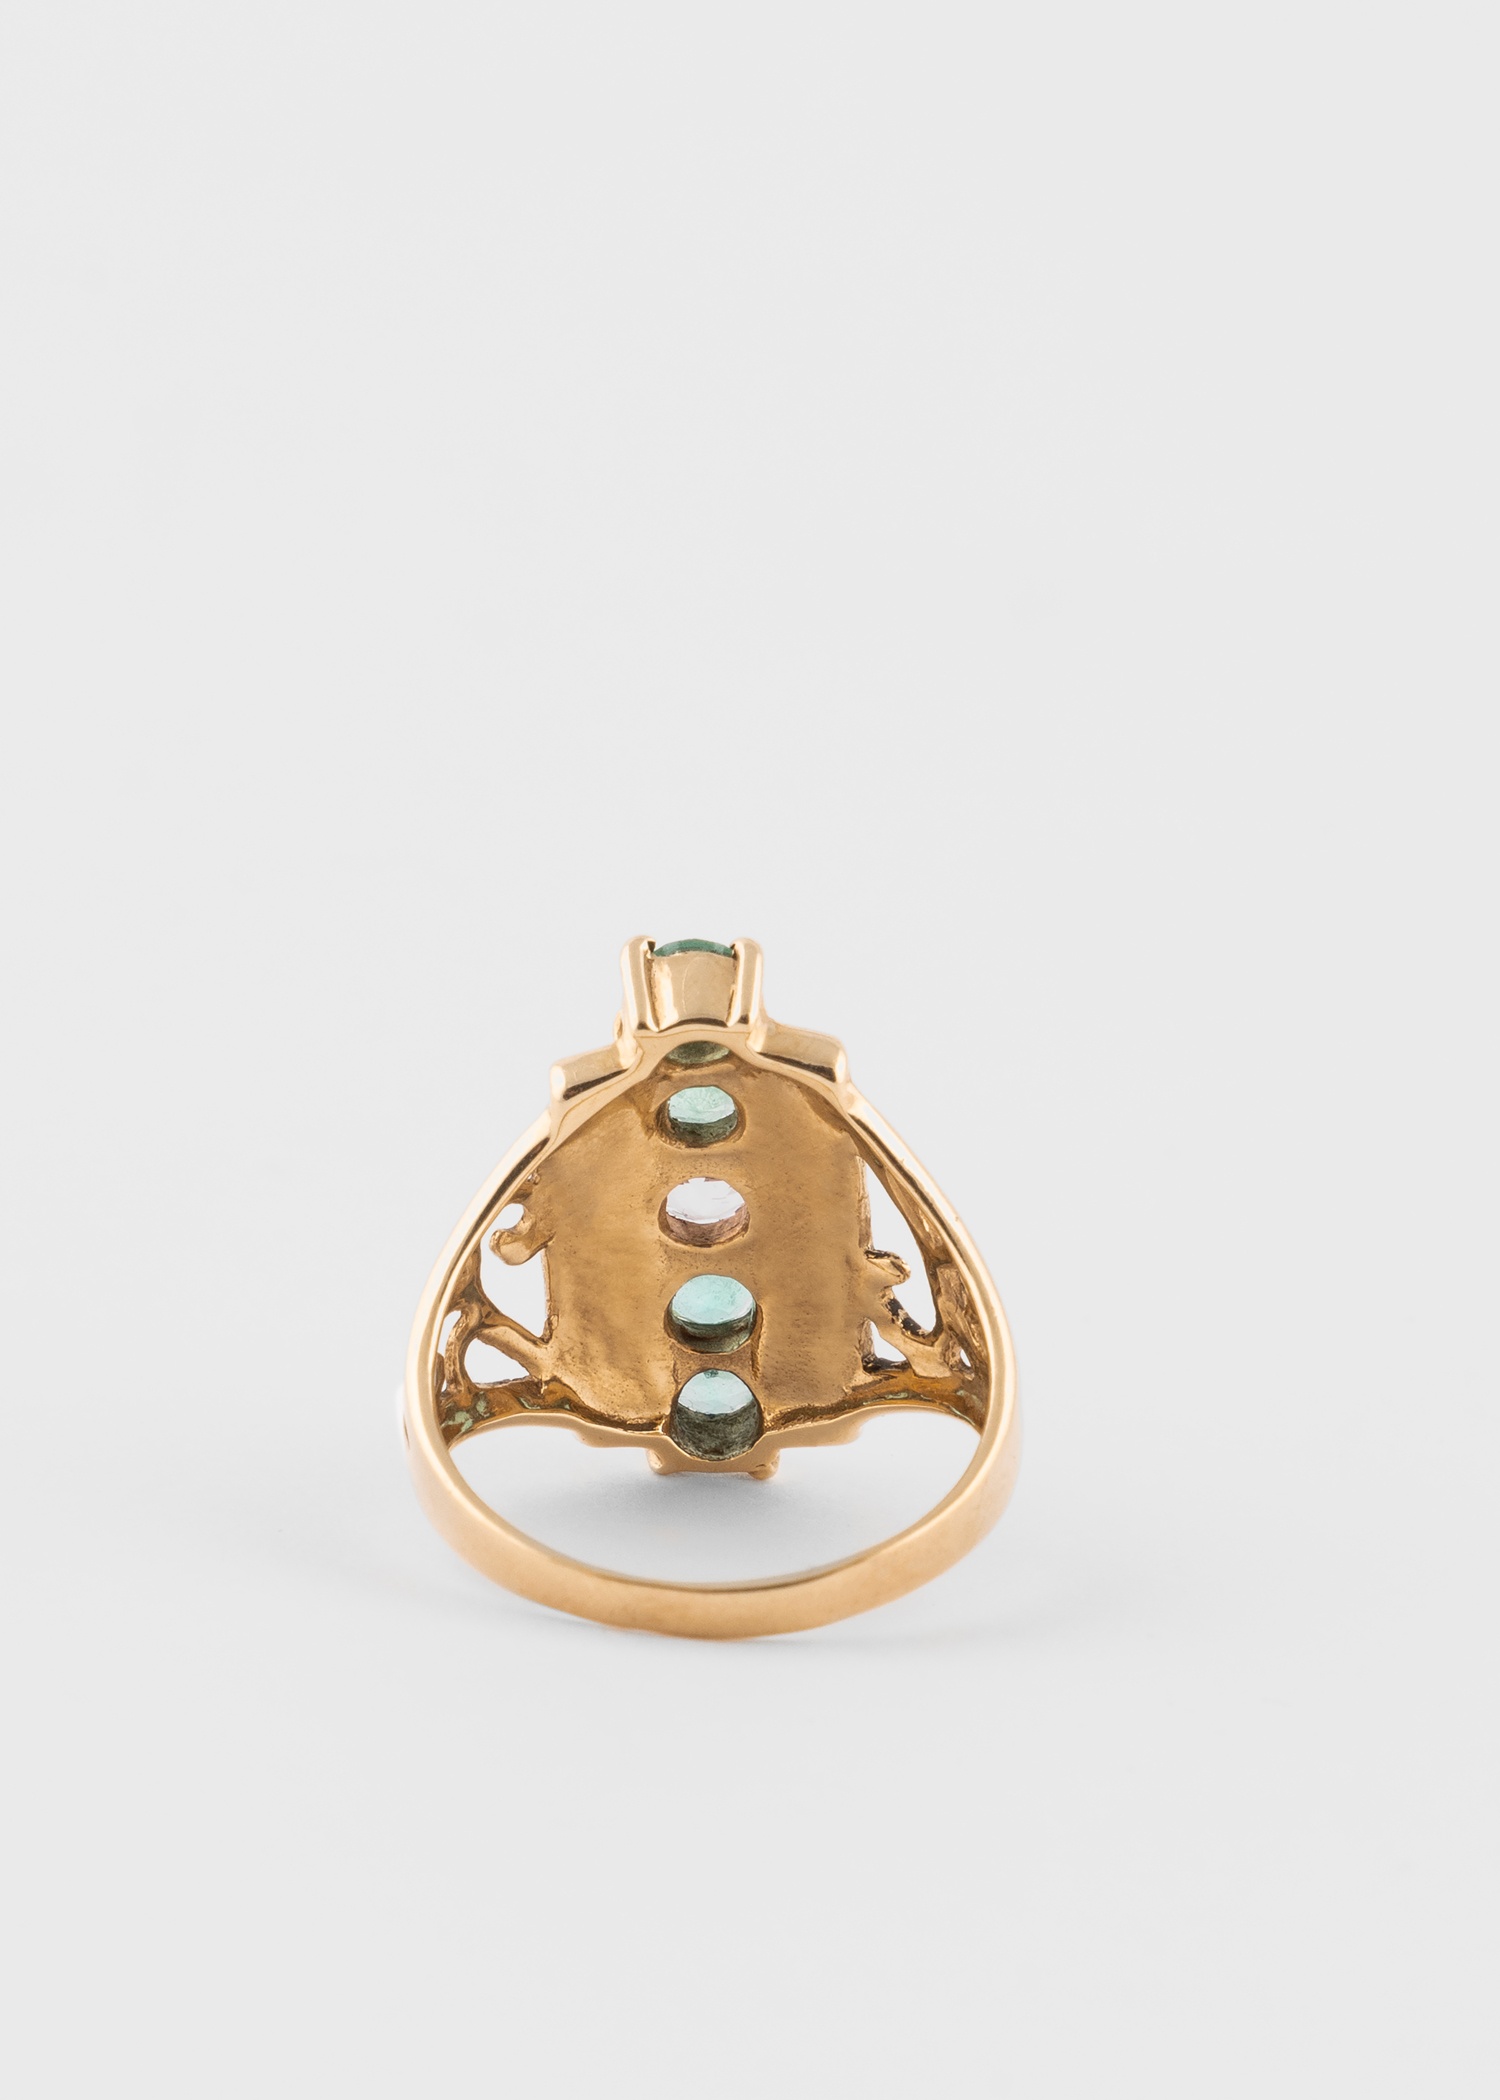 'Extravagant Emerald and Morganite' Gold Cocktail Ring by Barqoue Rocks - 4